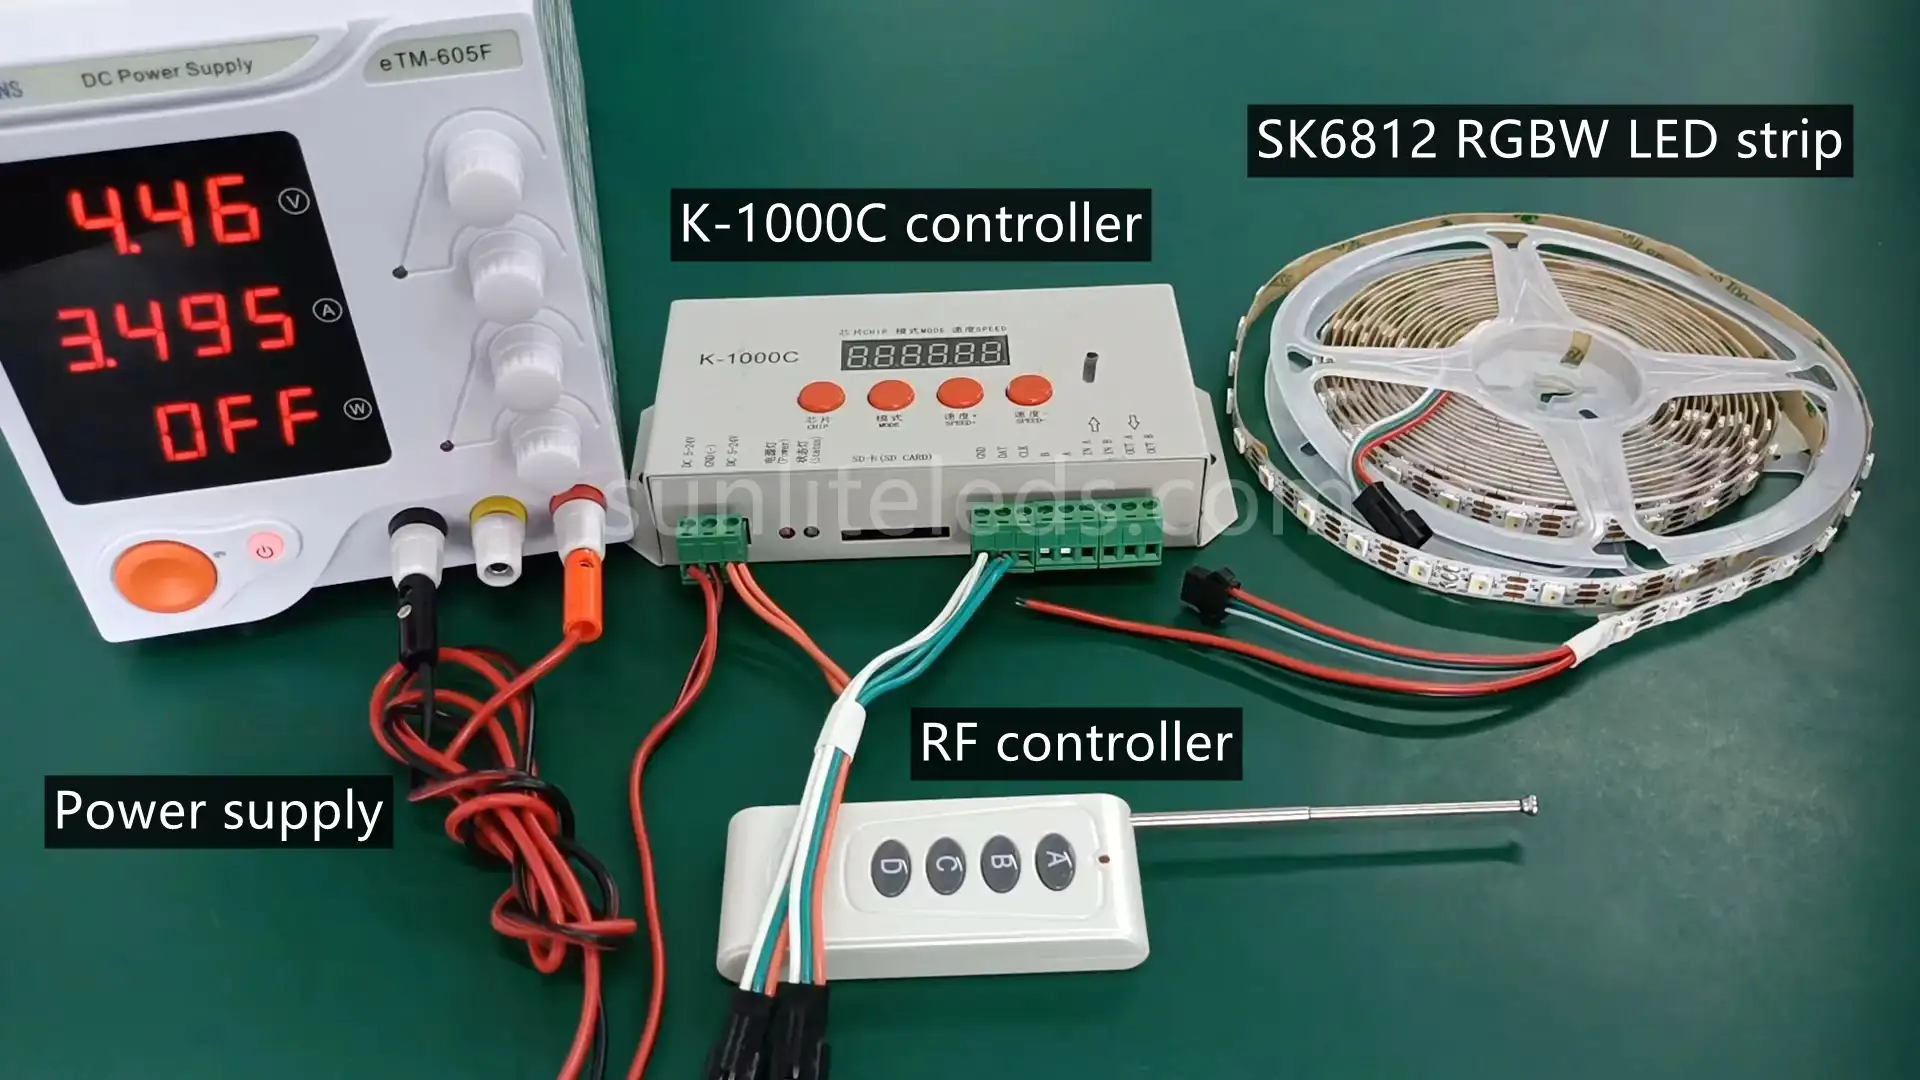 SK6812 LED strip connection device